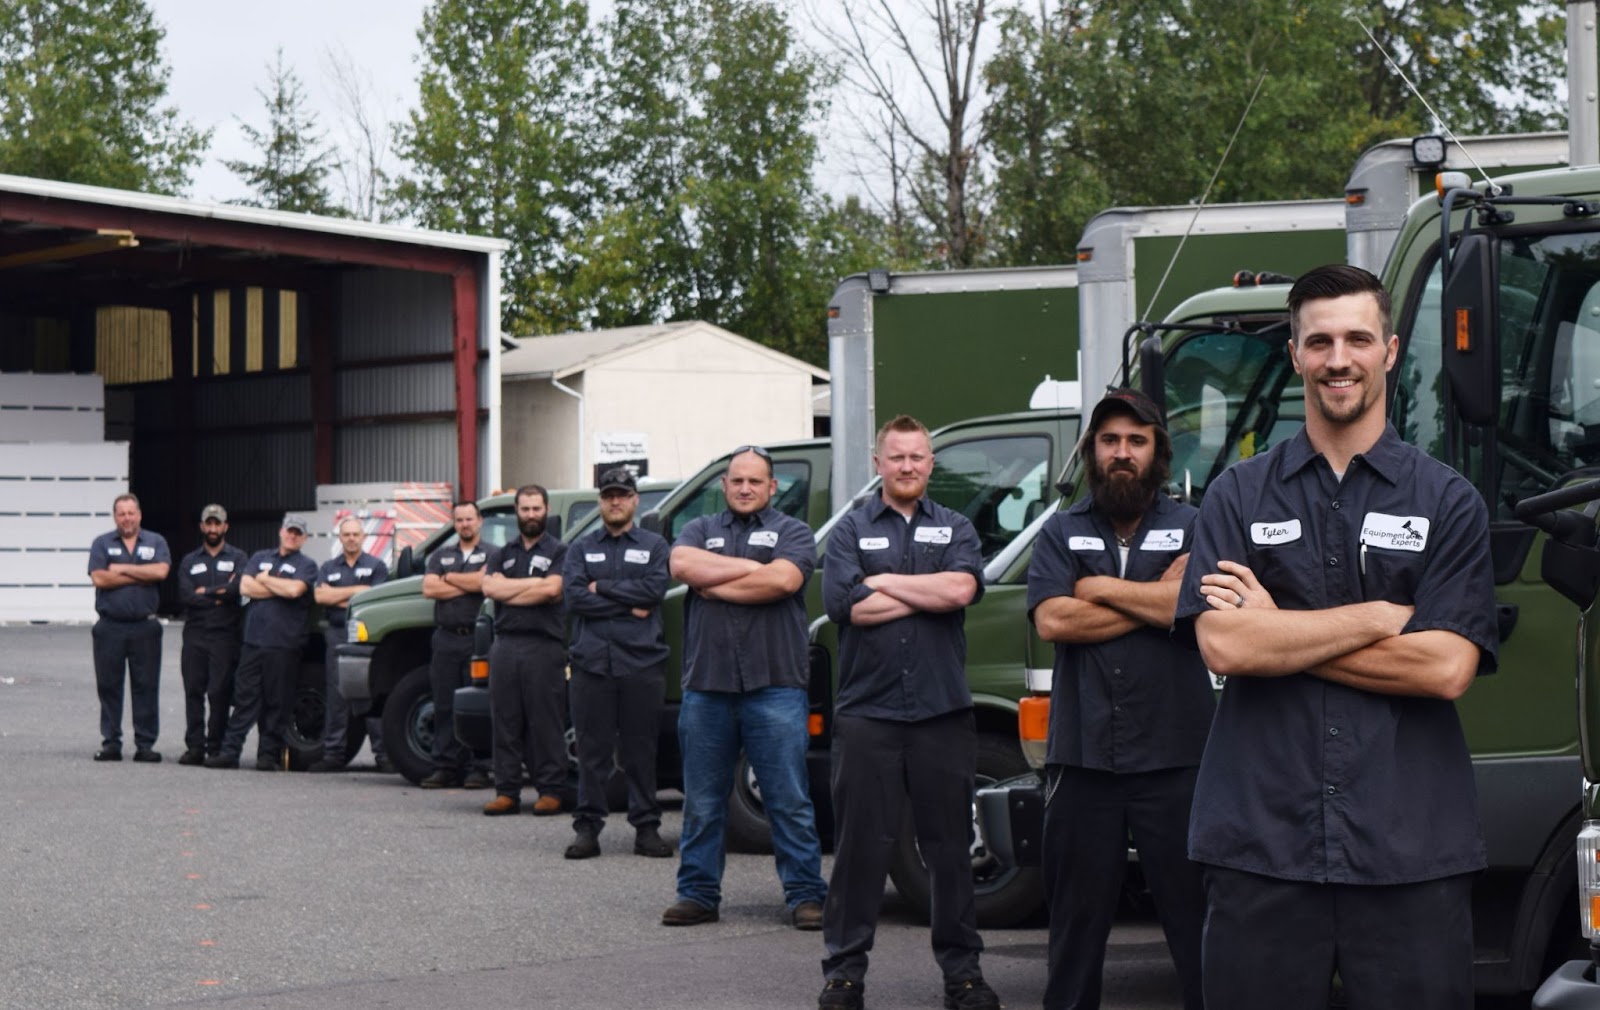 A team of diesel repair technicians with their arms crossed in a diagonal line while standing next to semi-trucks